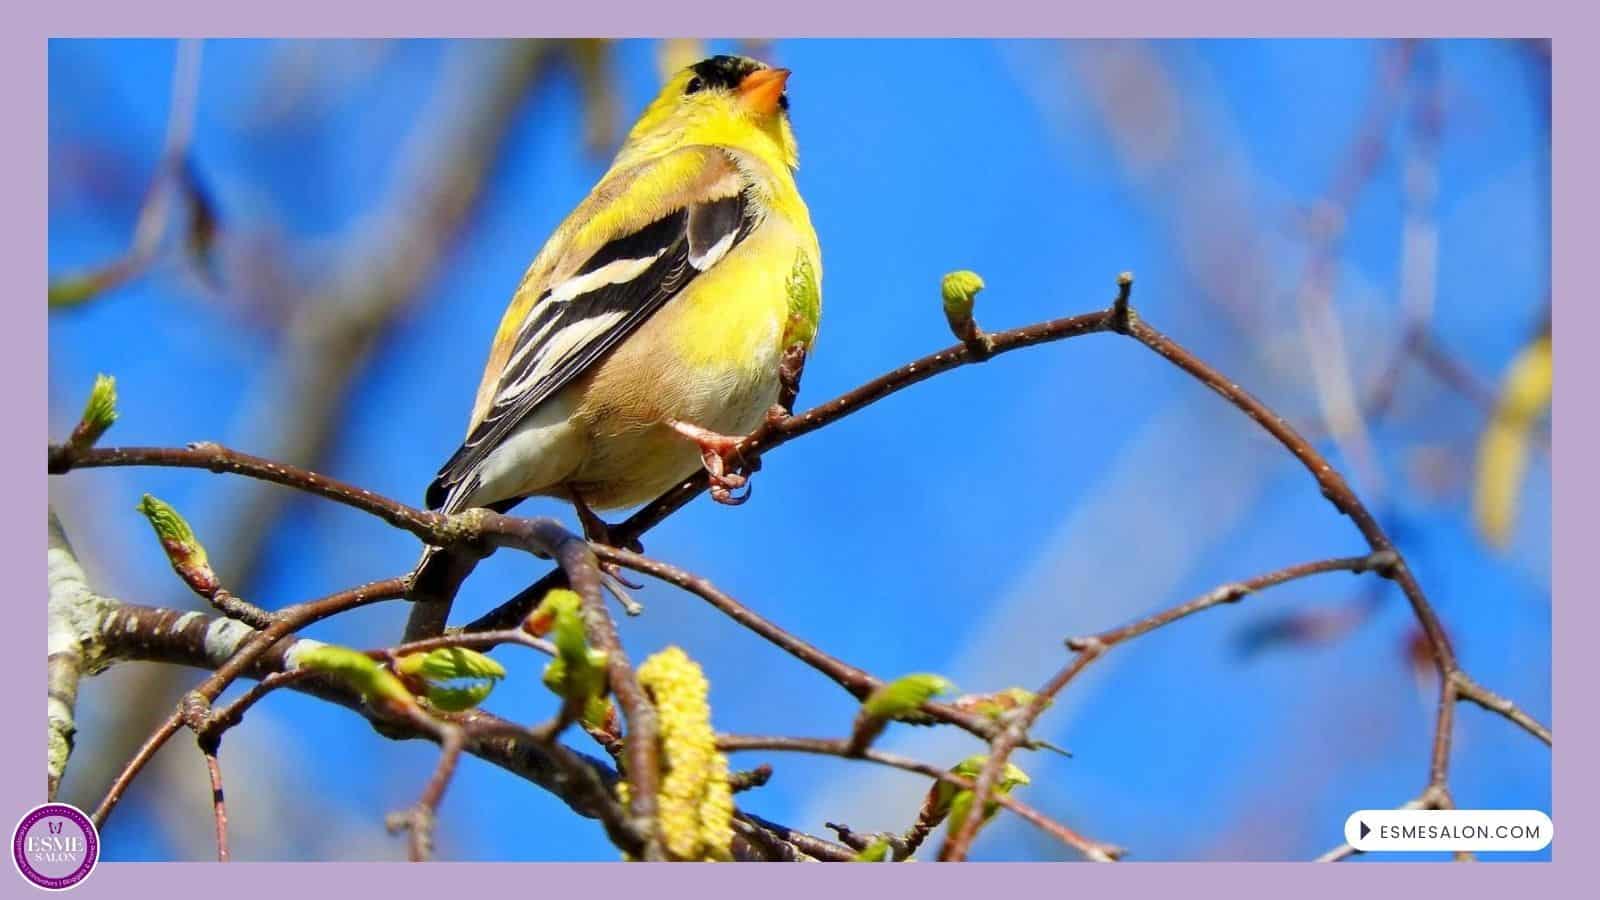 an image of an American Goldfinch sitting on a branch